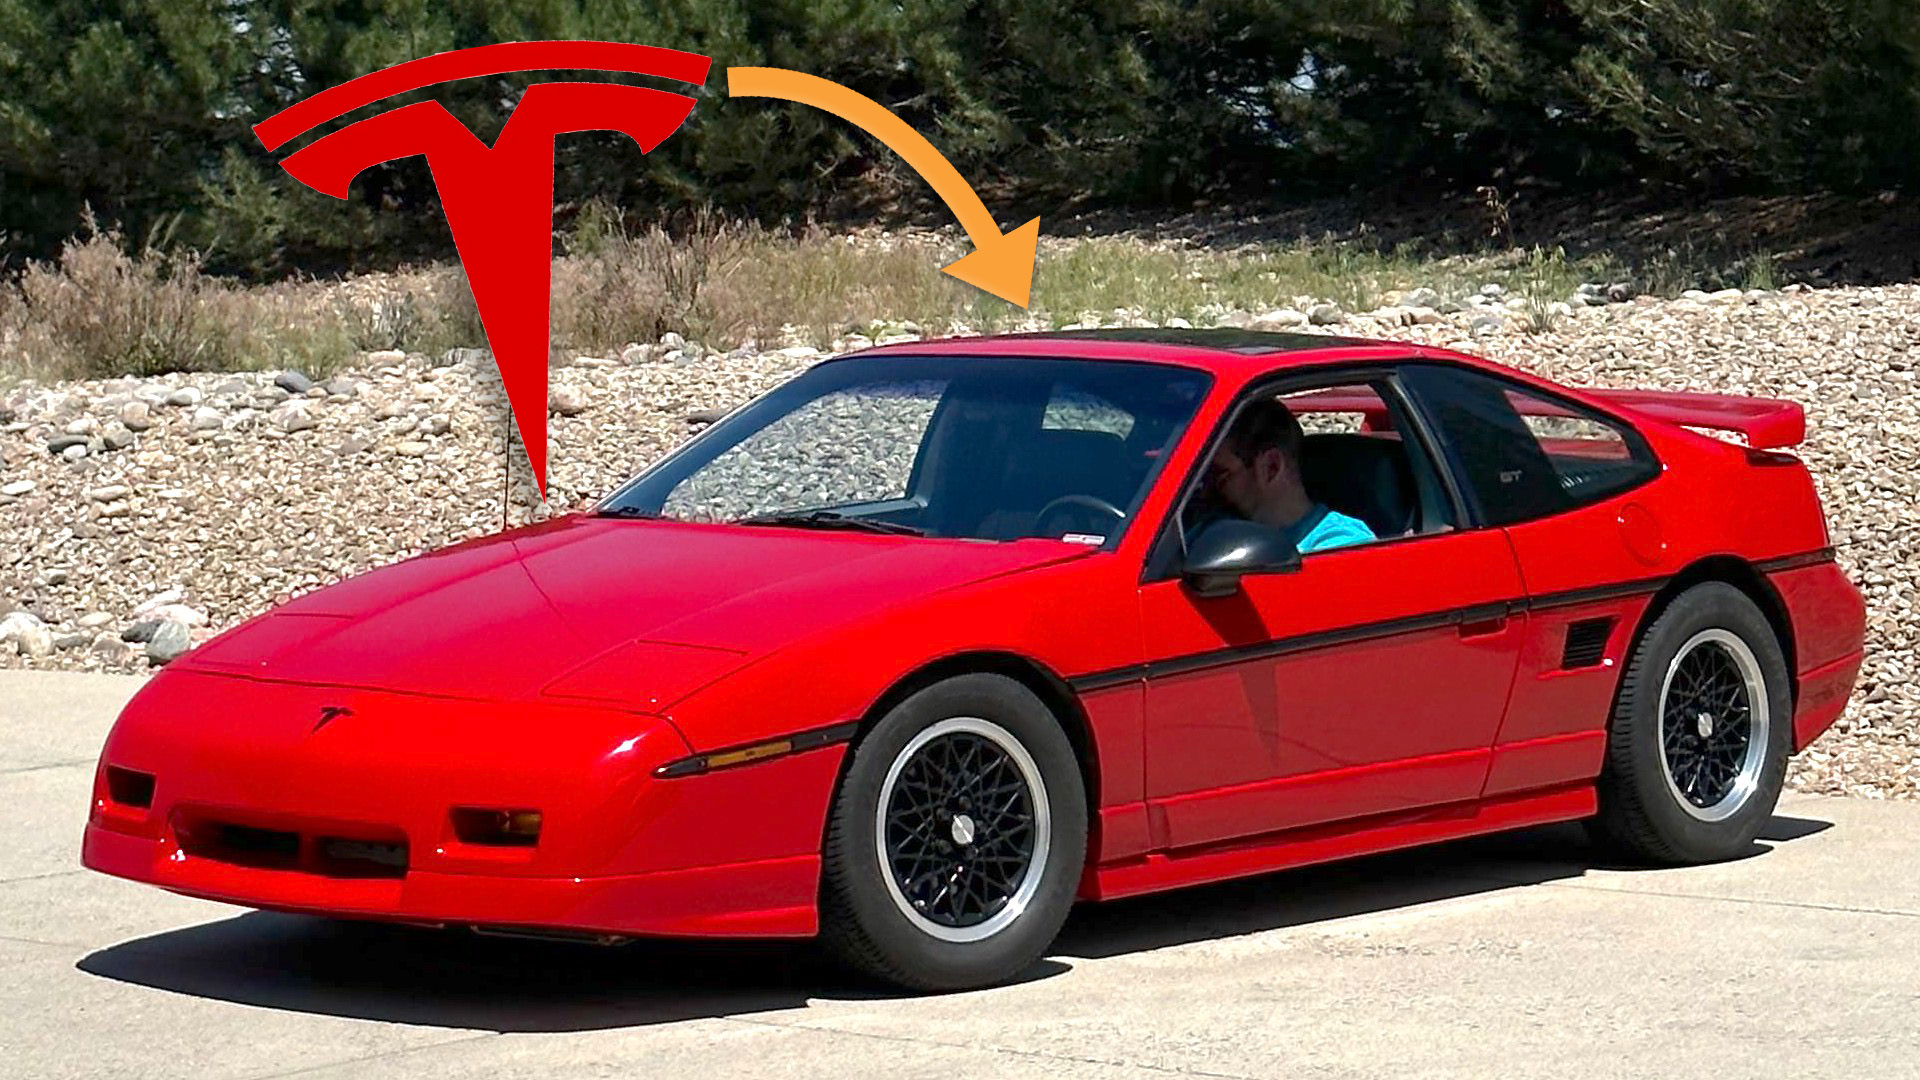 A red Pontiac Fiero with a Tesla logo hovering above it